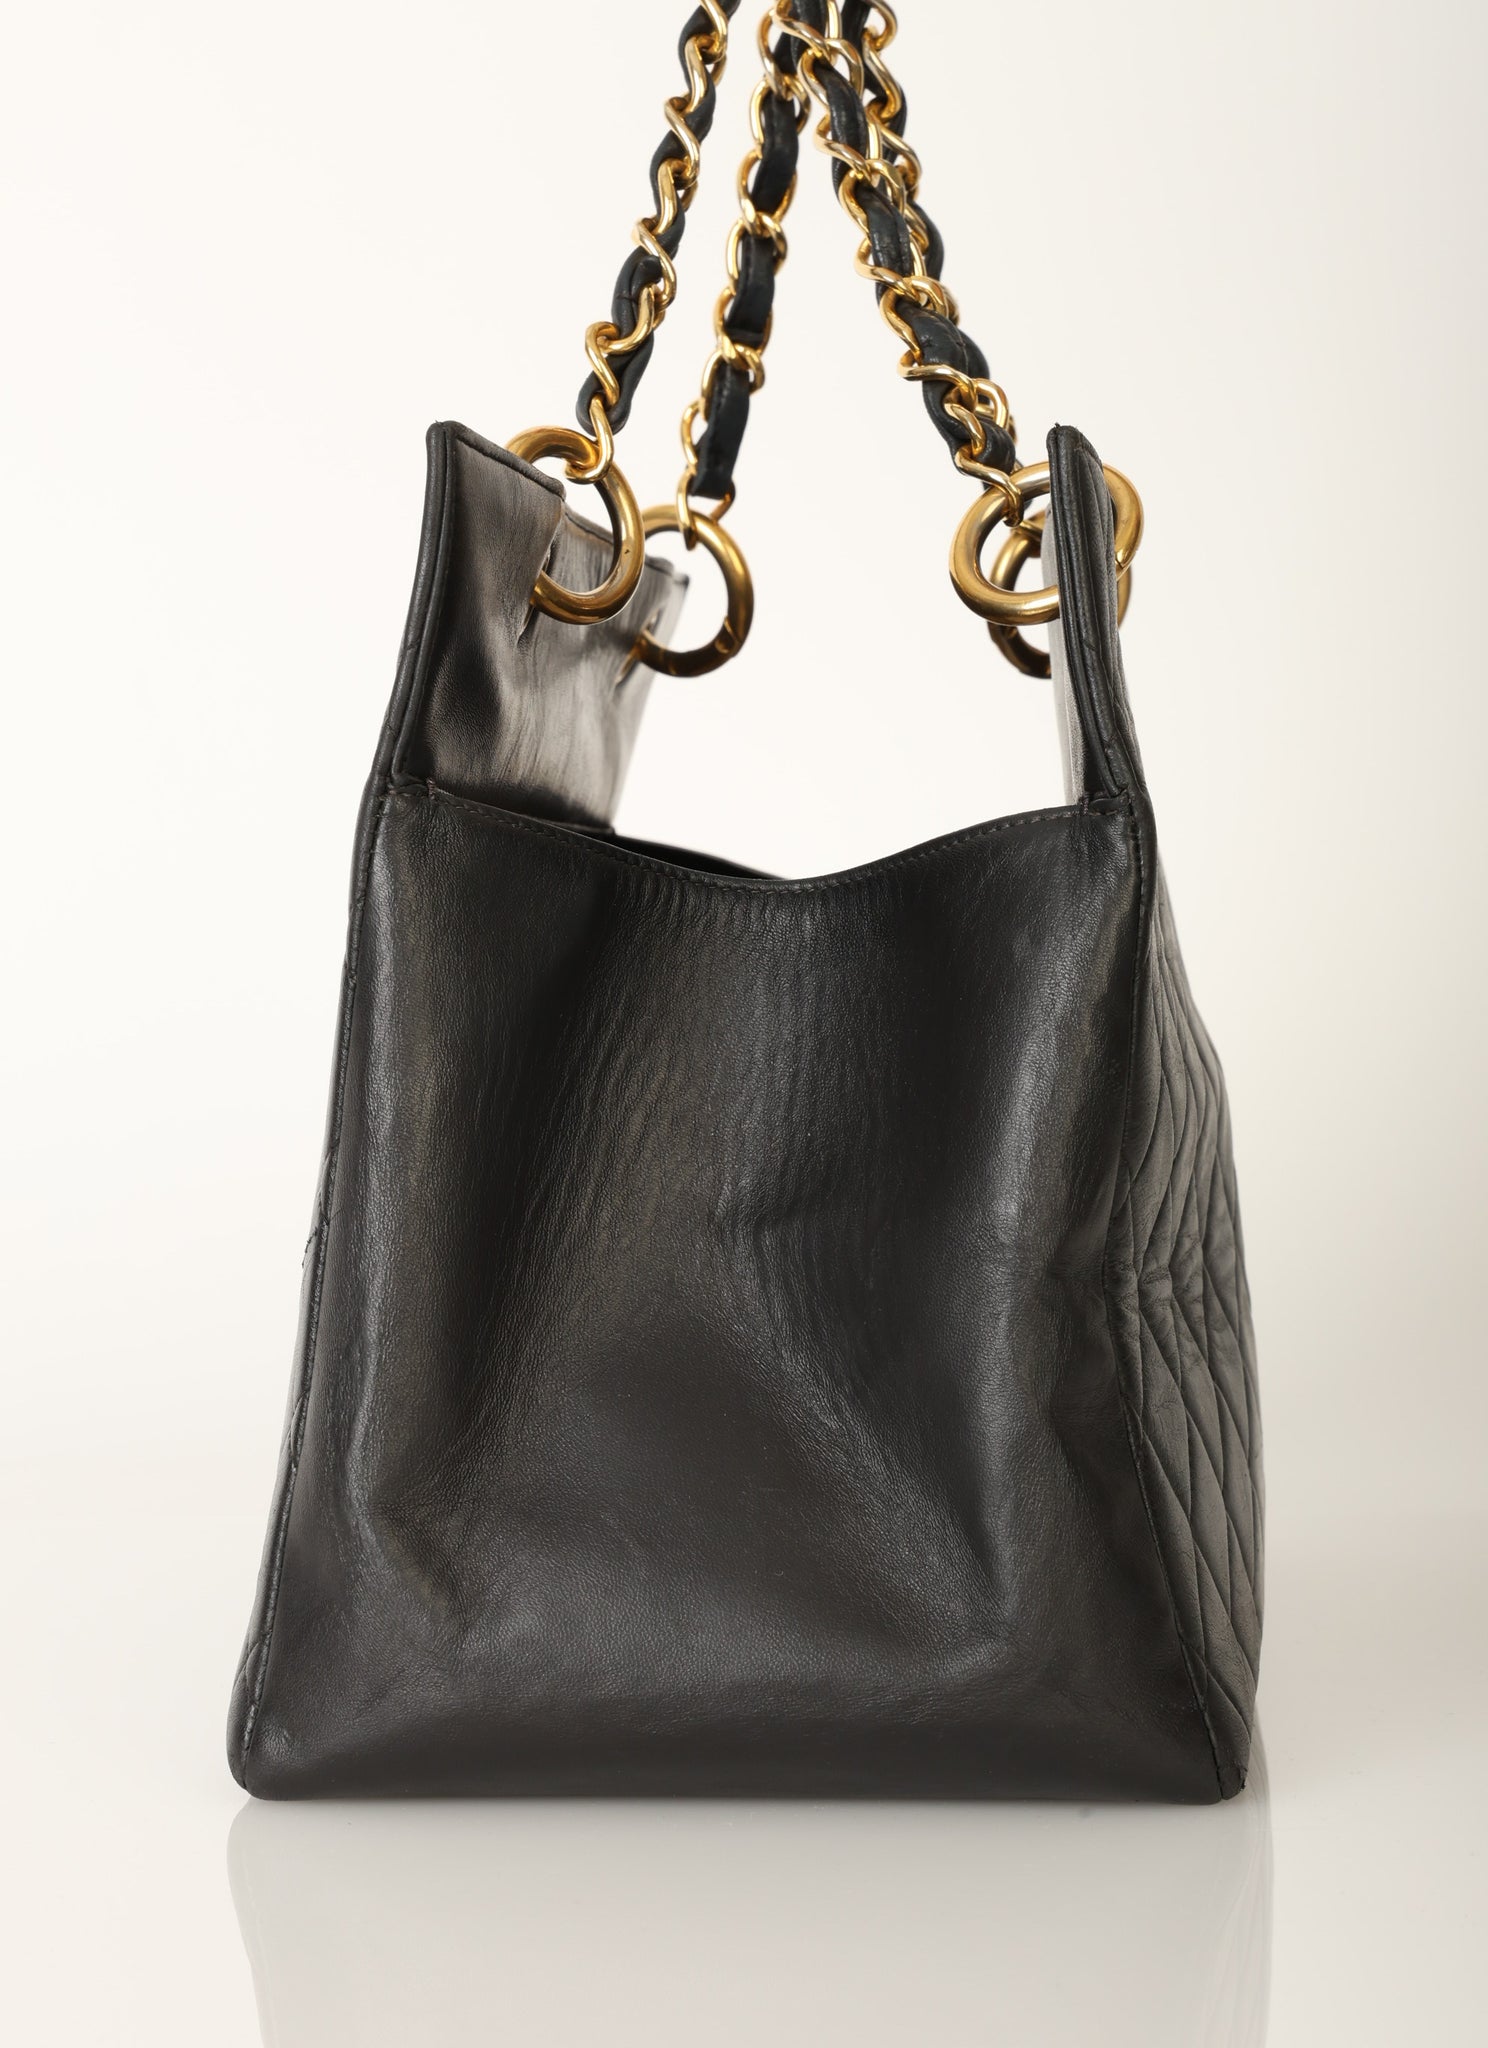 Chanel Lambskin Timeless Chain Tote